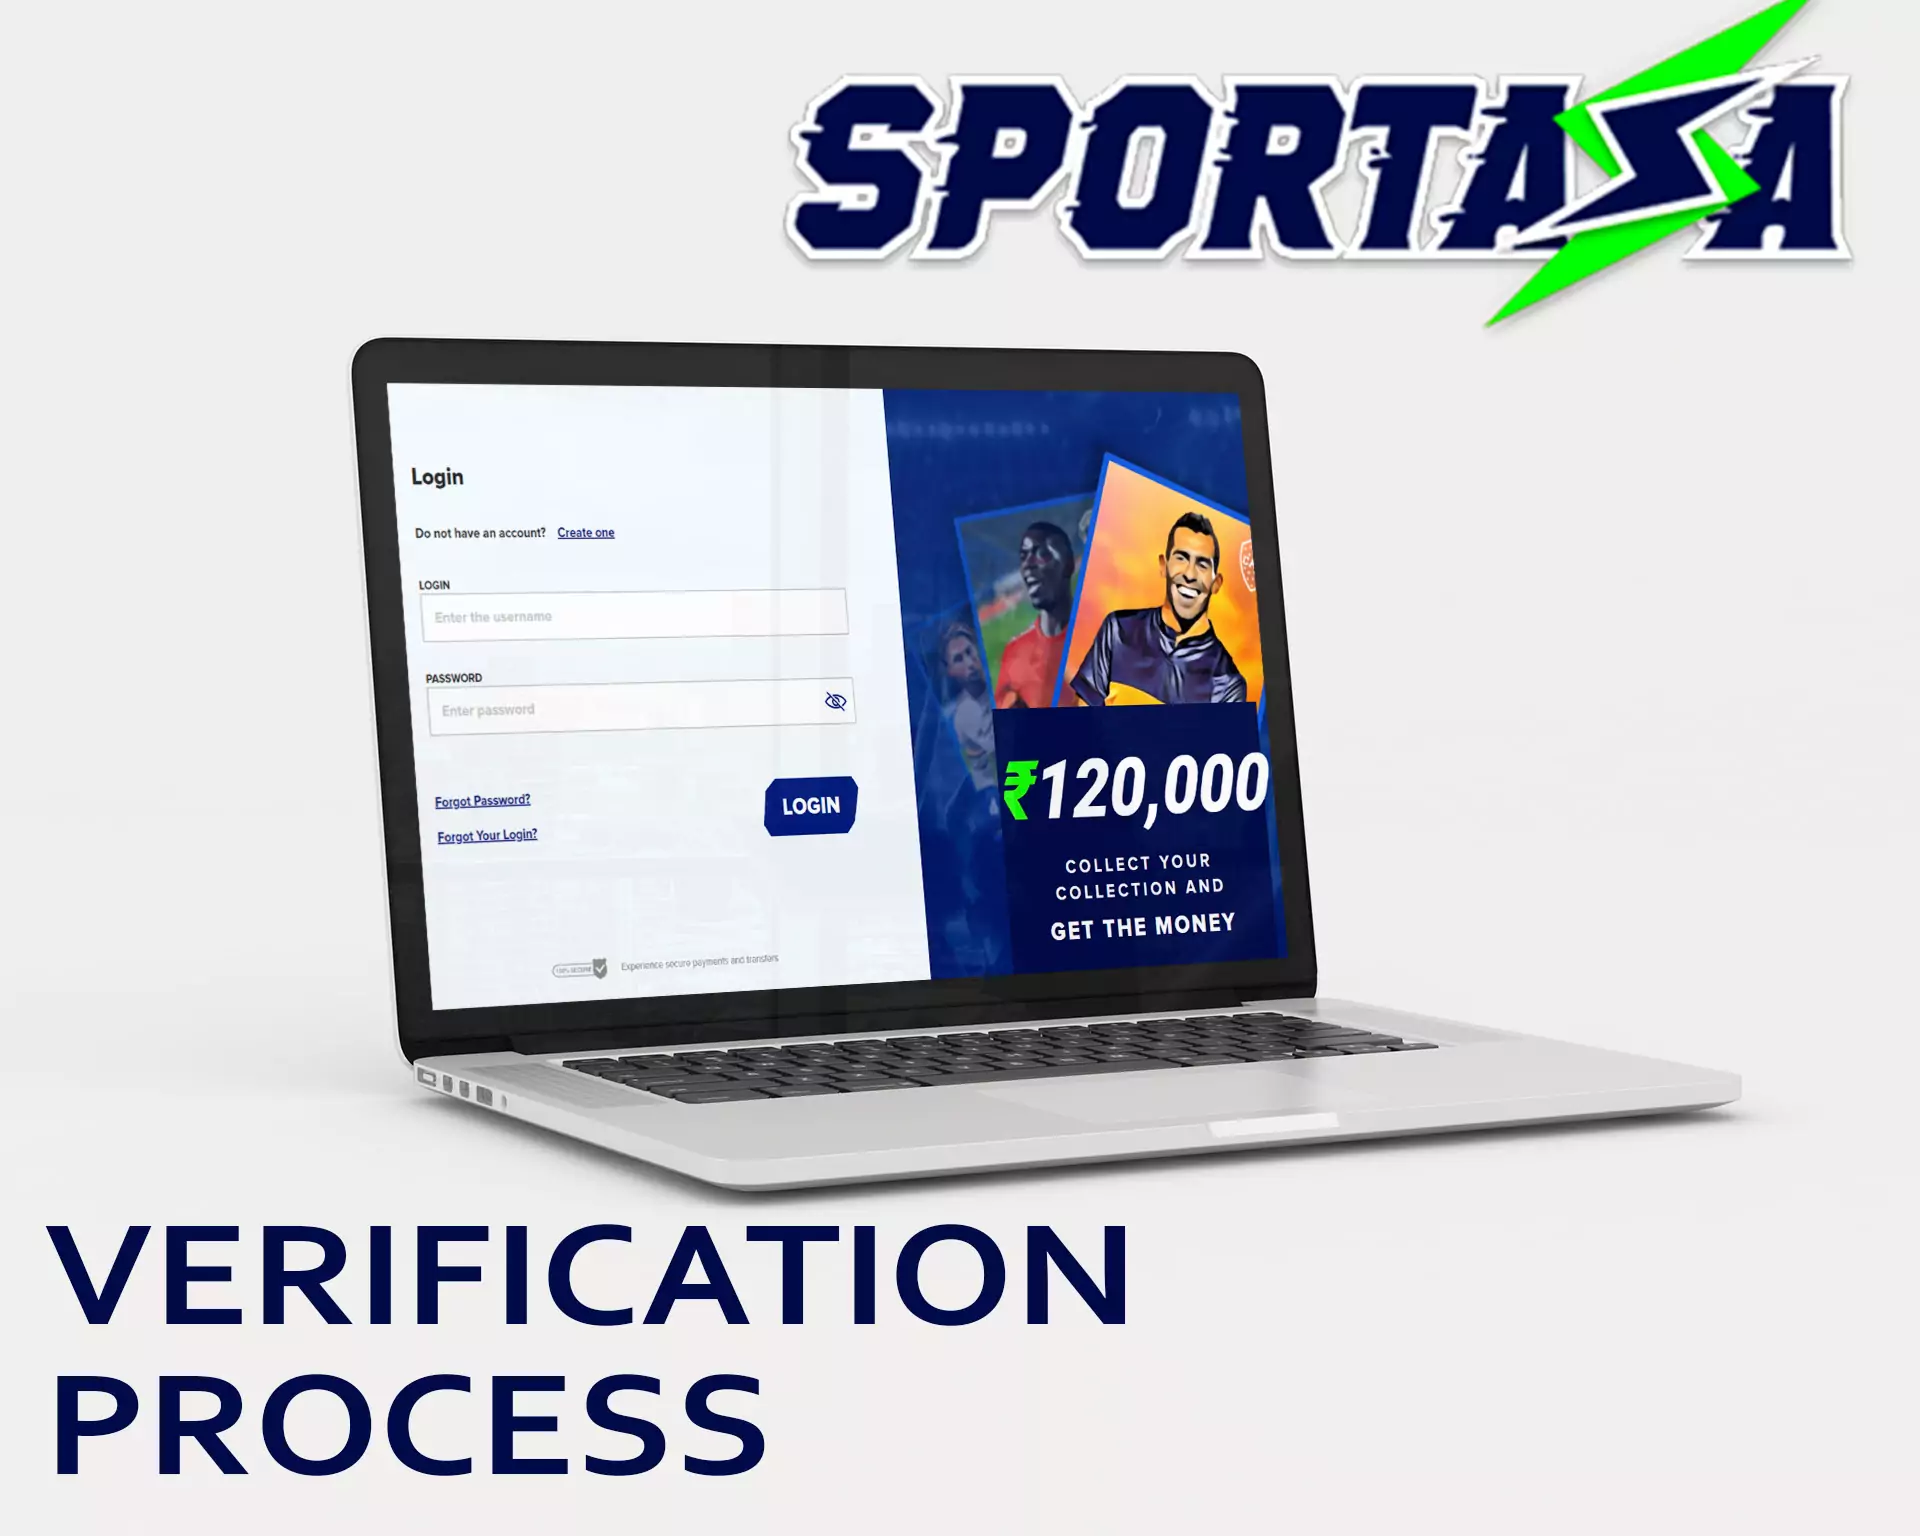 Verification is required for the Sportaza account to work fully.